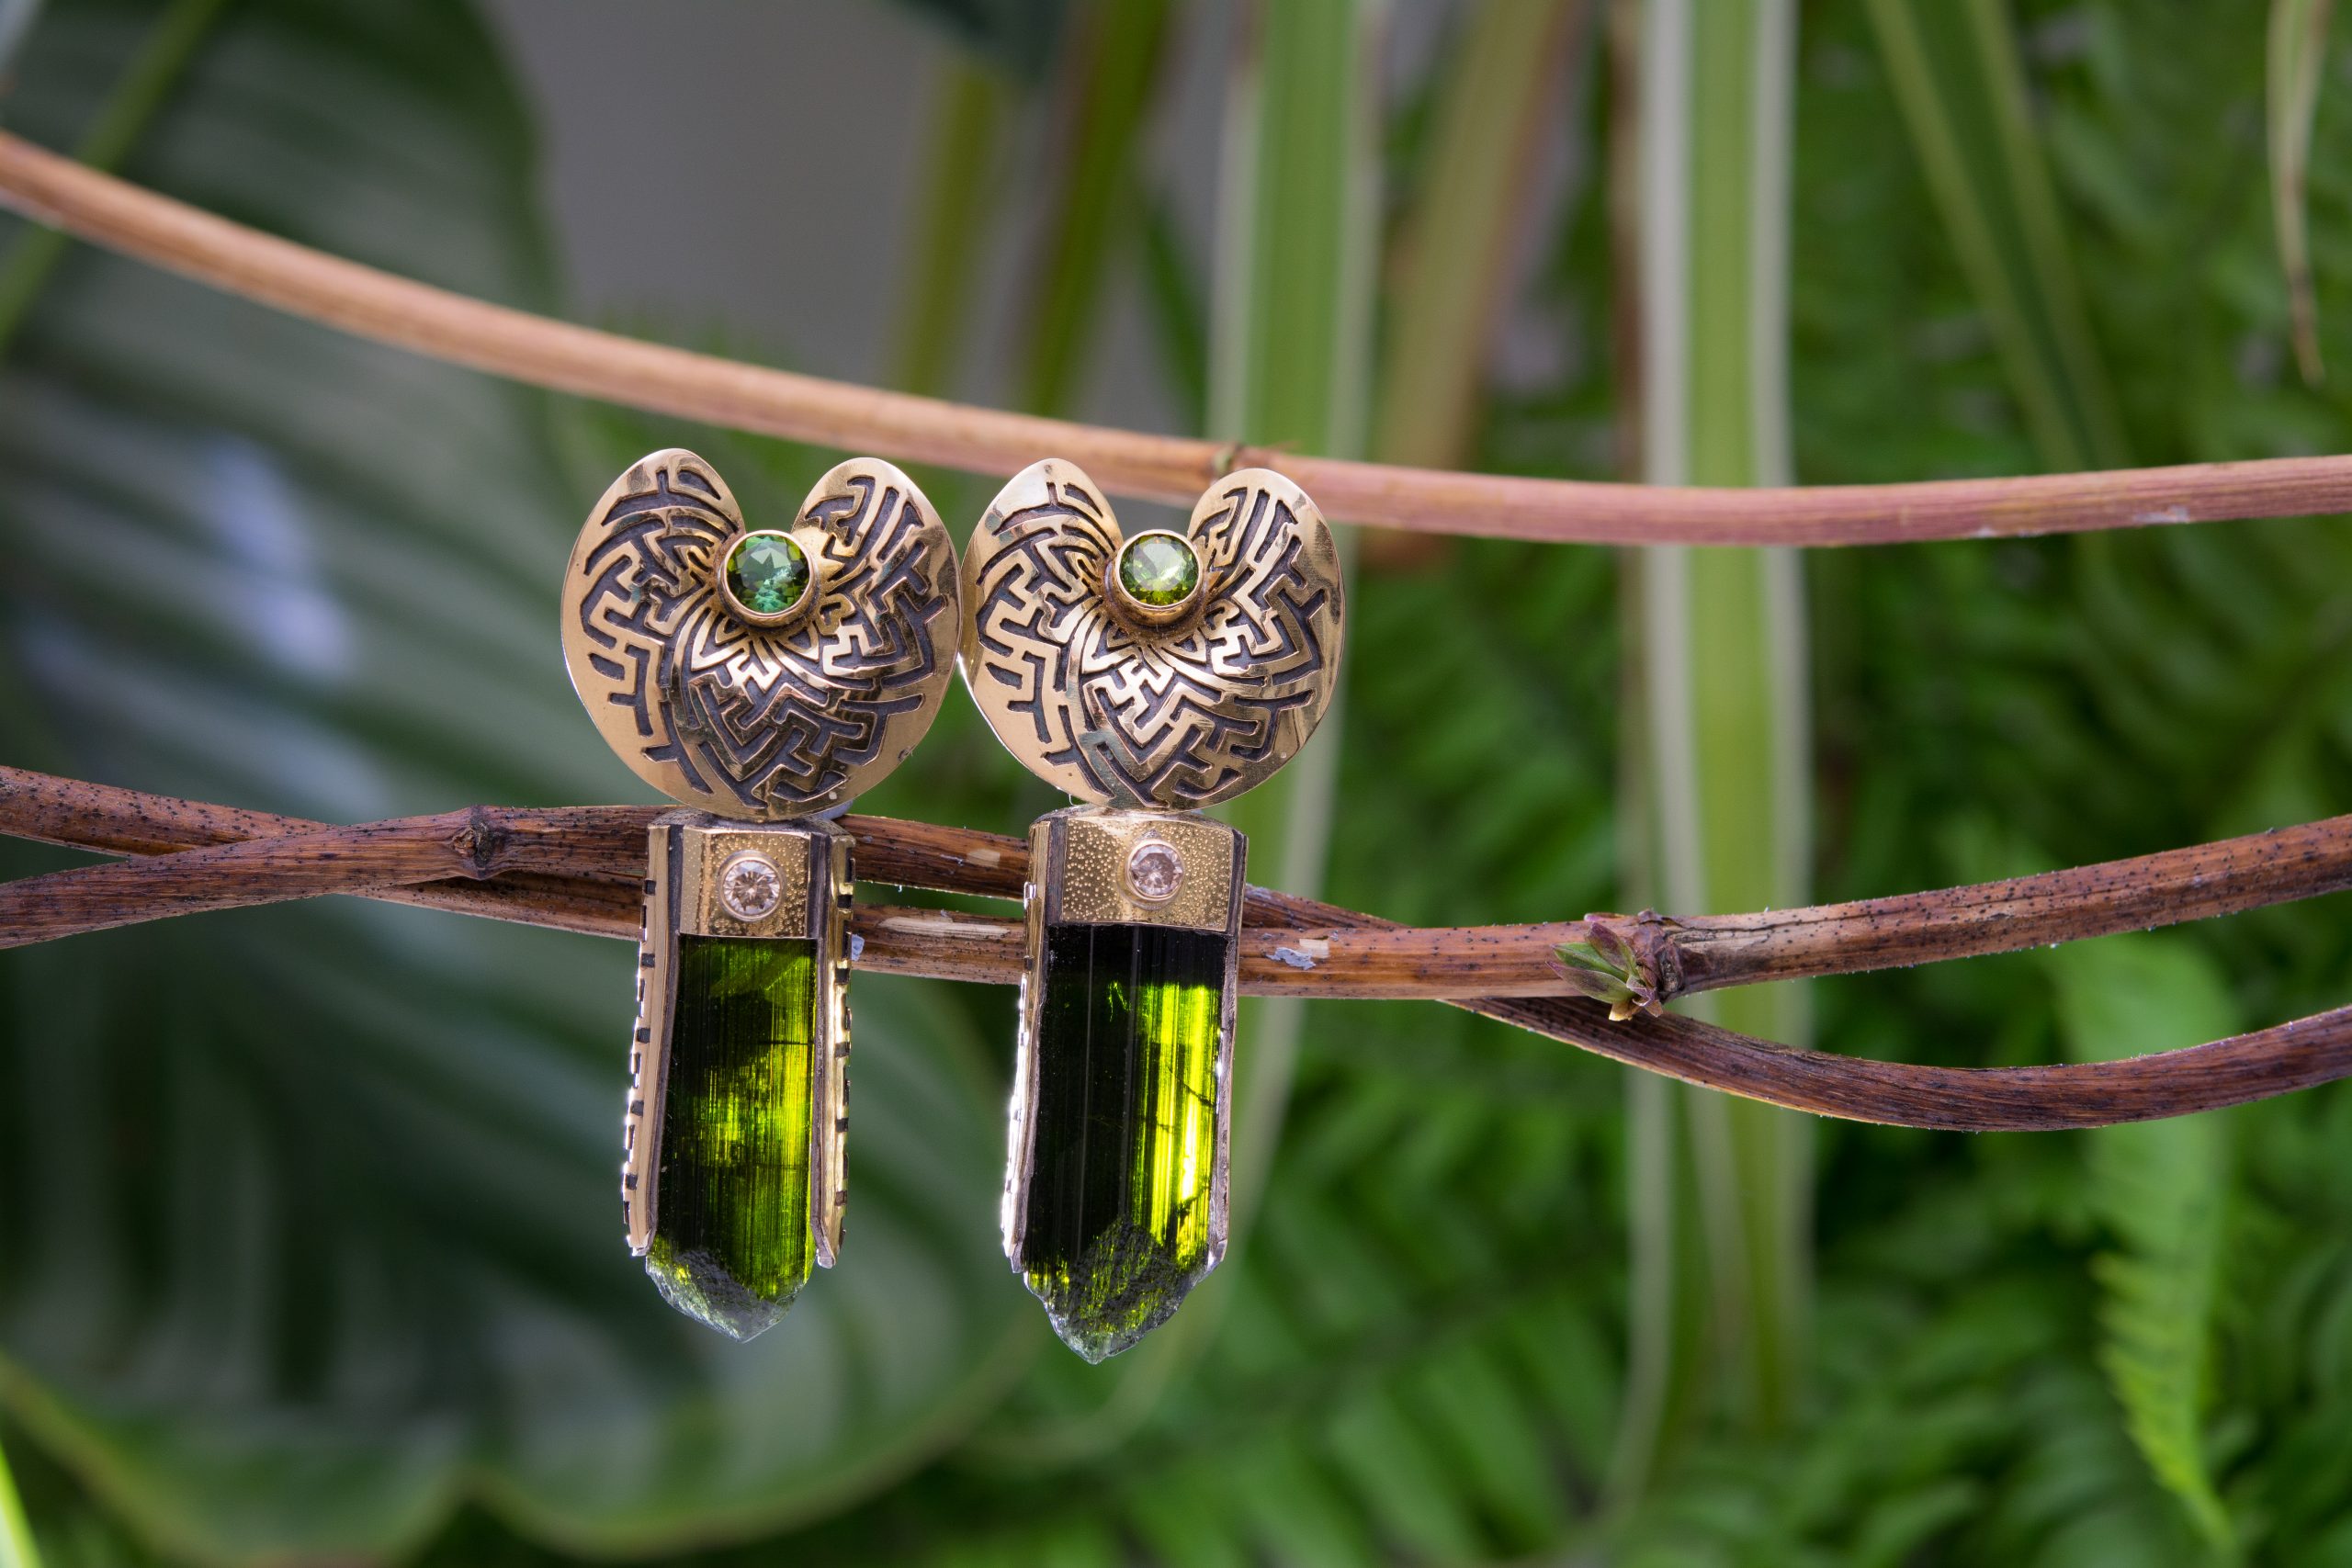 Genuine green tourmaline ear weights crafted by Naga, balanced on a branch the pair are side by side with curved silver cup shaped wearable pieces